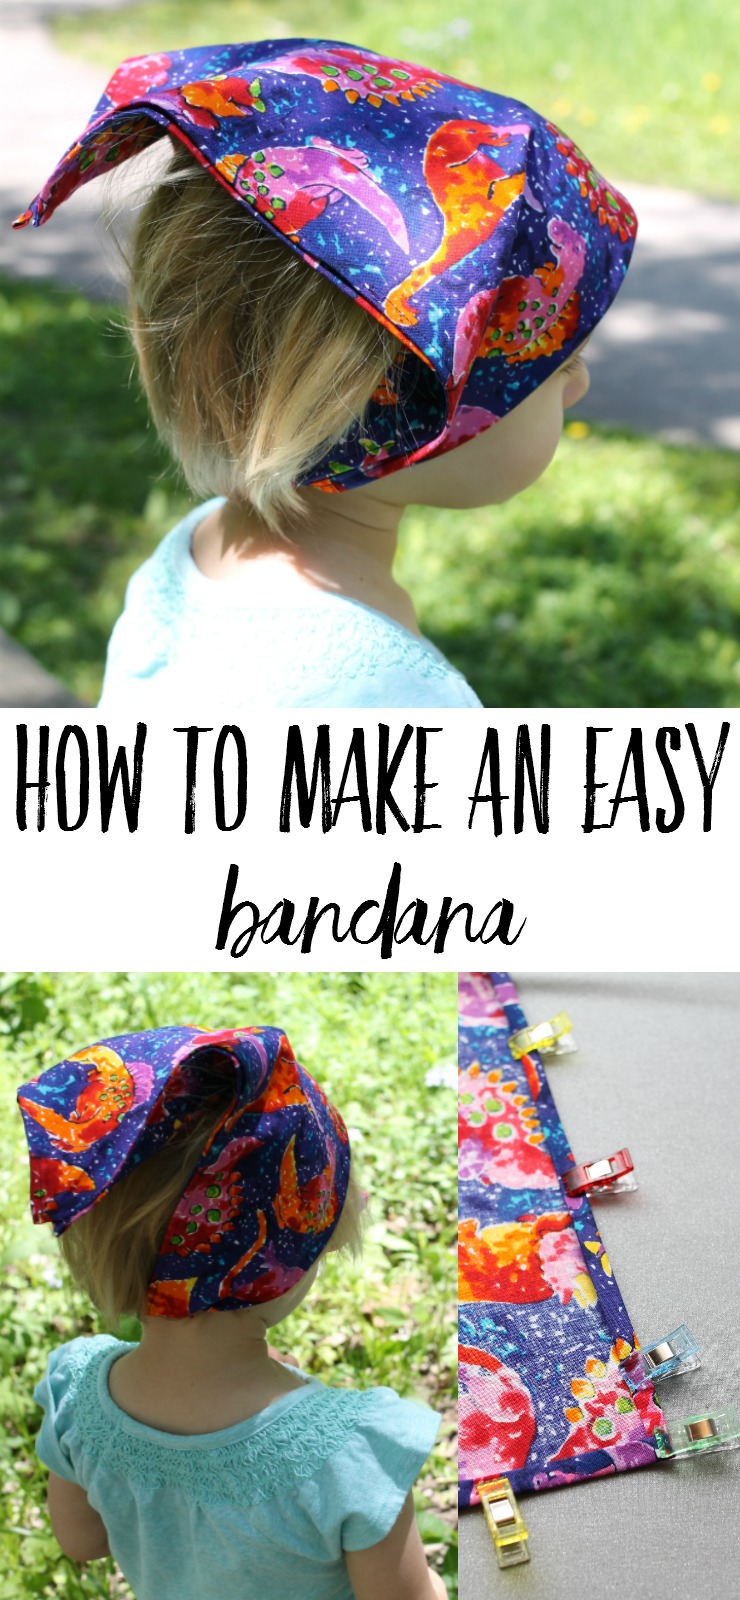 Learn how to make a bandana for kids - an easy sewing project for beginners! This bandana is fast and easy to make, and will keep hair and sweat out of happy faces this summer.